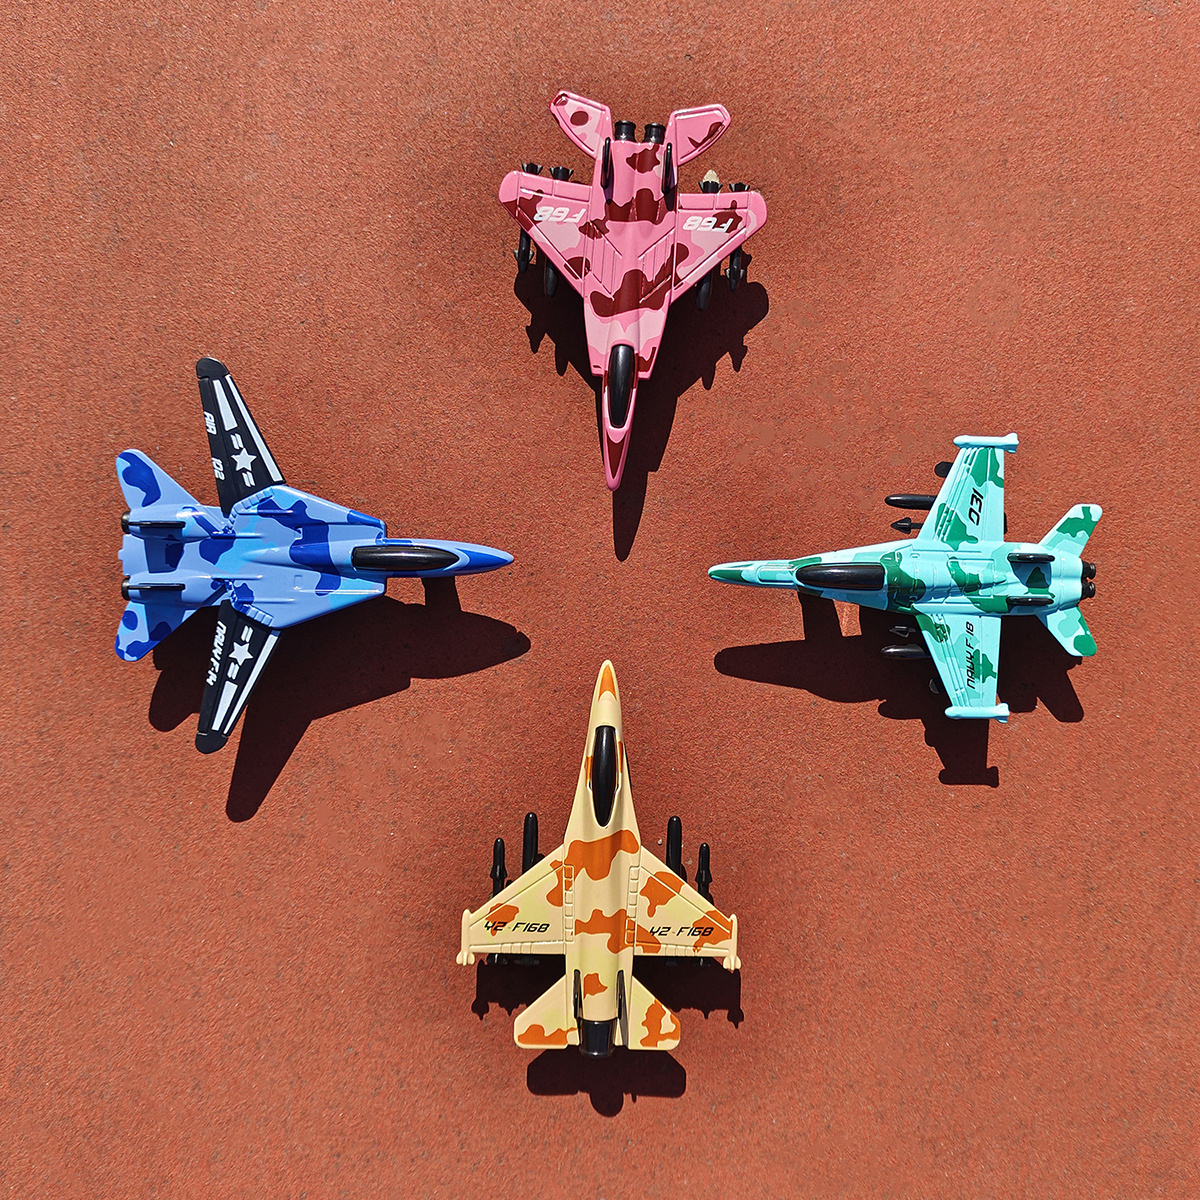 Toy Jet Fighter Planes